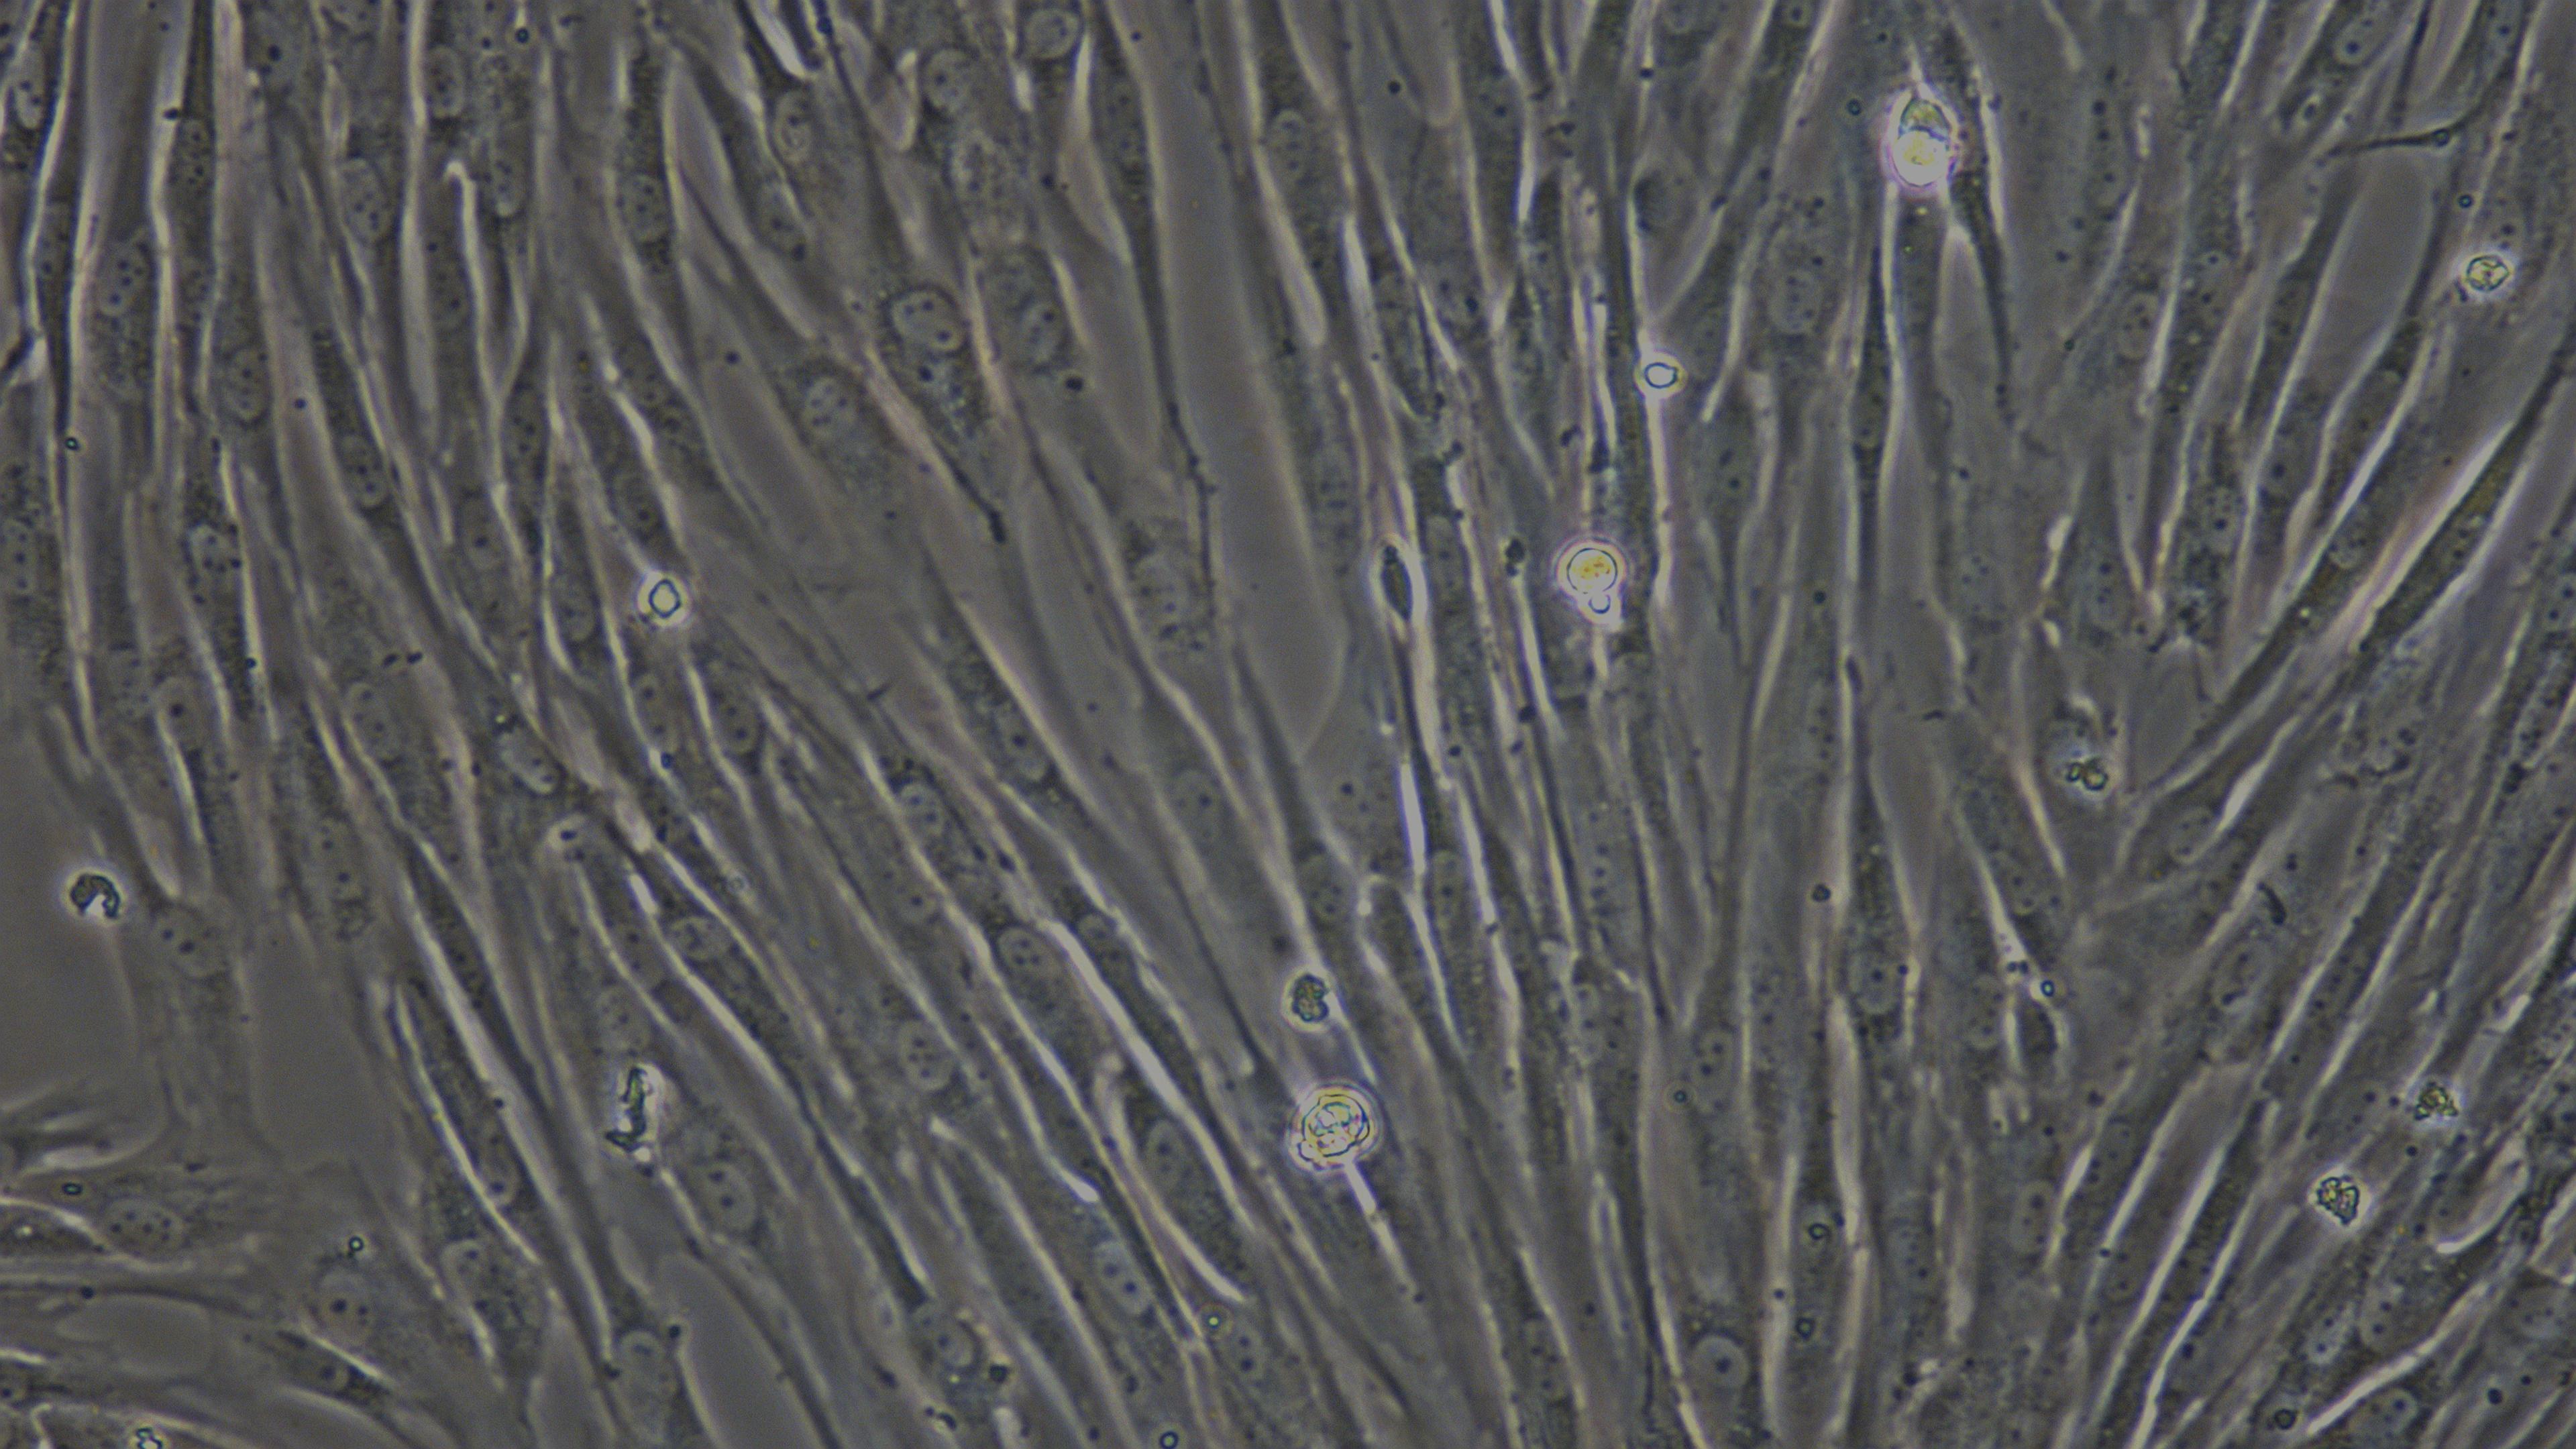 Primary Canine Leydig Cells (LC)